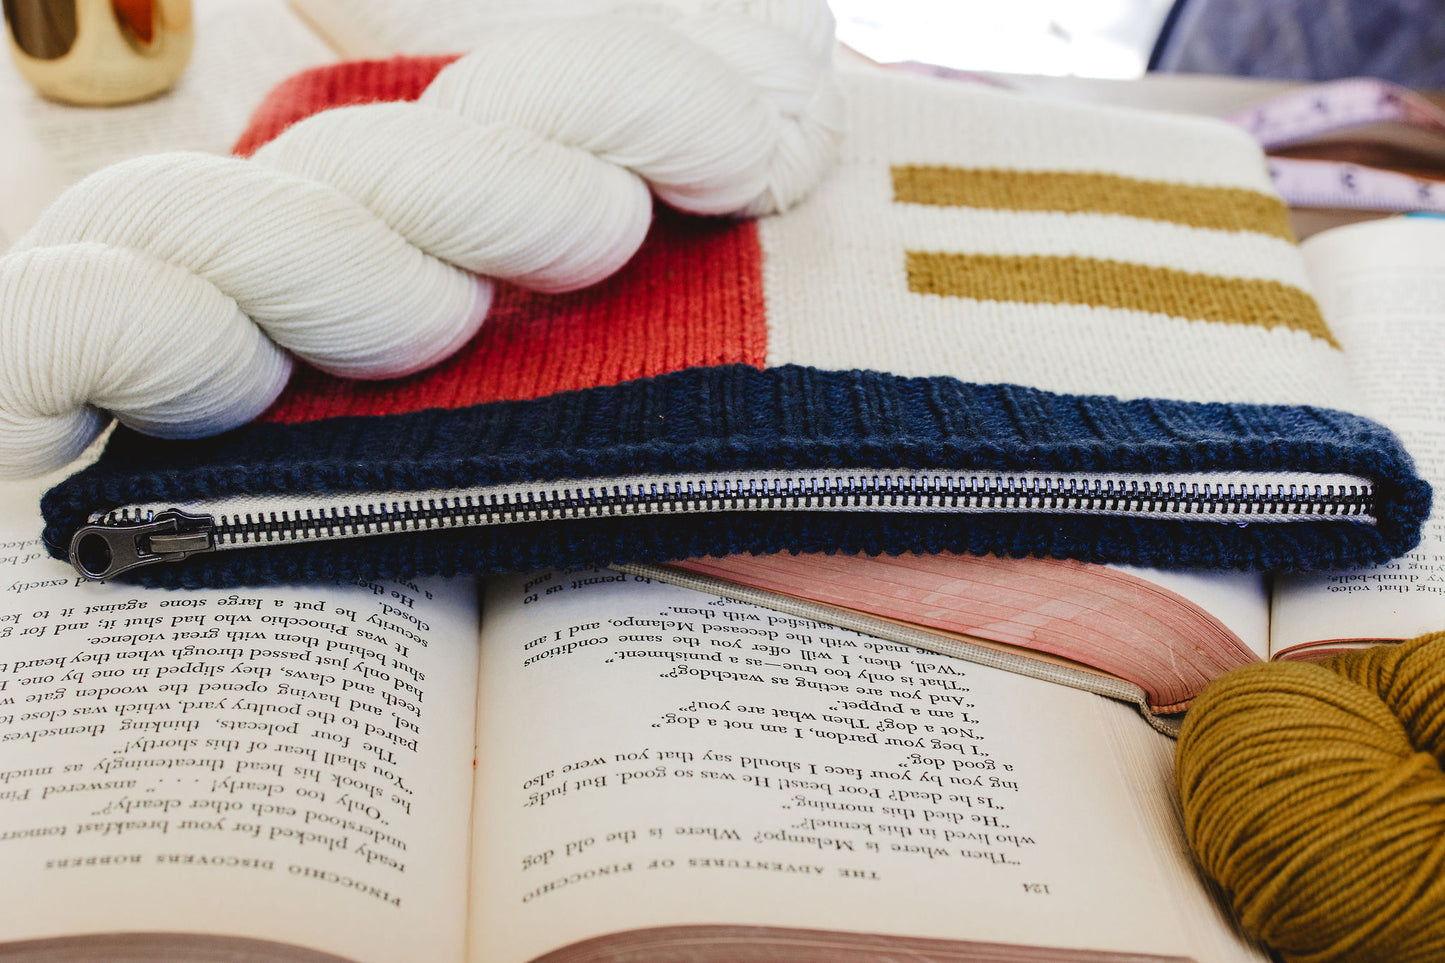 A hand knit notions case, zipped close, lies on top of open books, under a cream skein of yarn. The case is knit in a colorblock design, using intarsia techniques, made with cream , ochre, pink, and navy blue yarn.